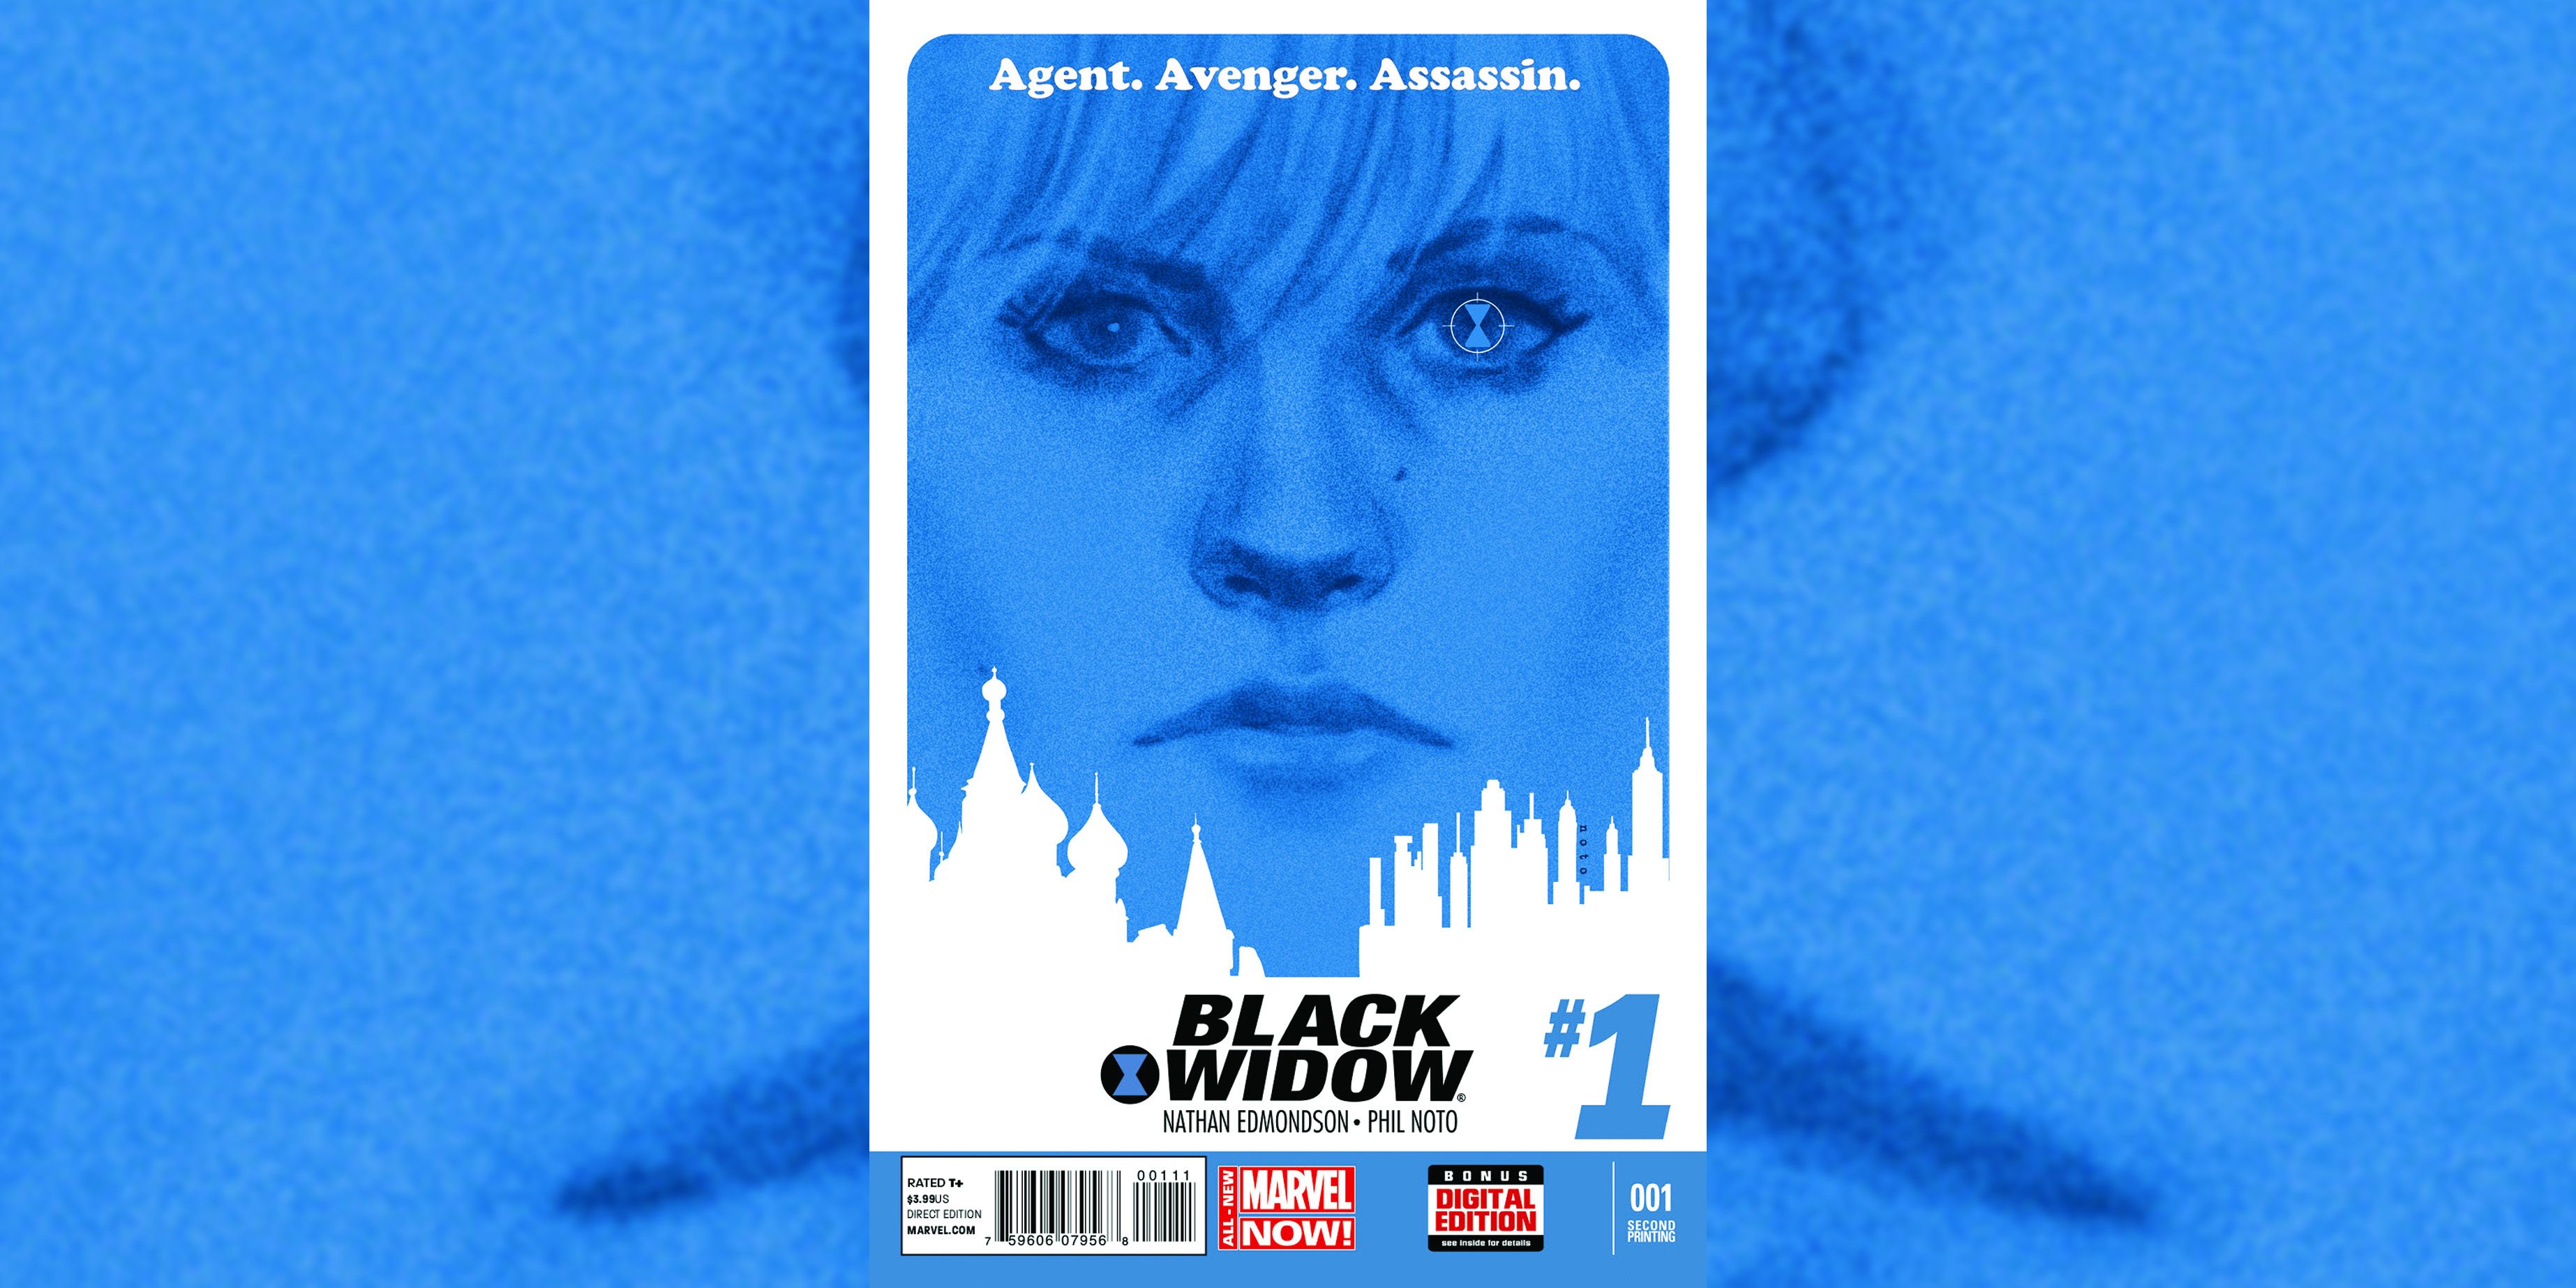 Black Widow's The Finely Woven Thread storyline